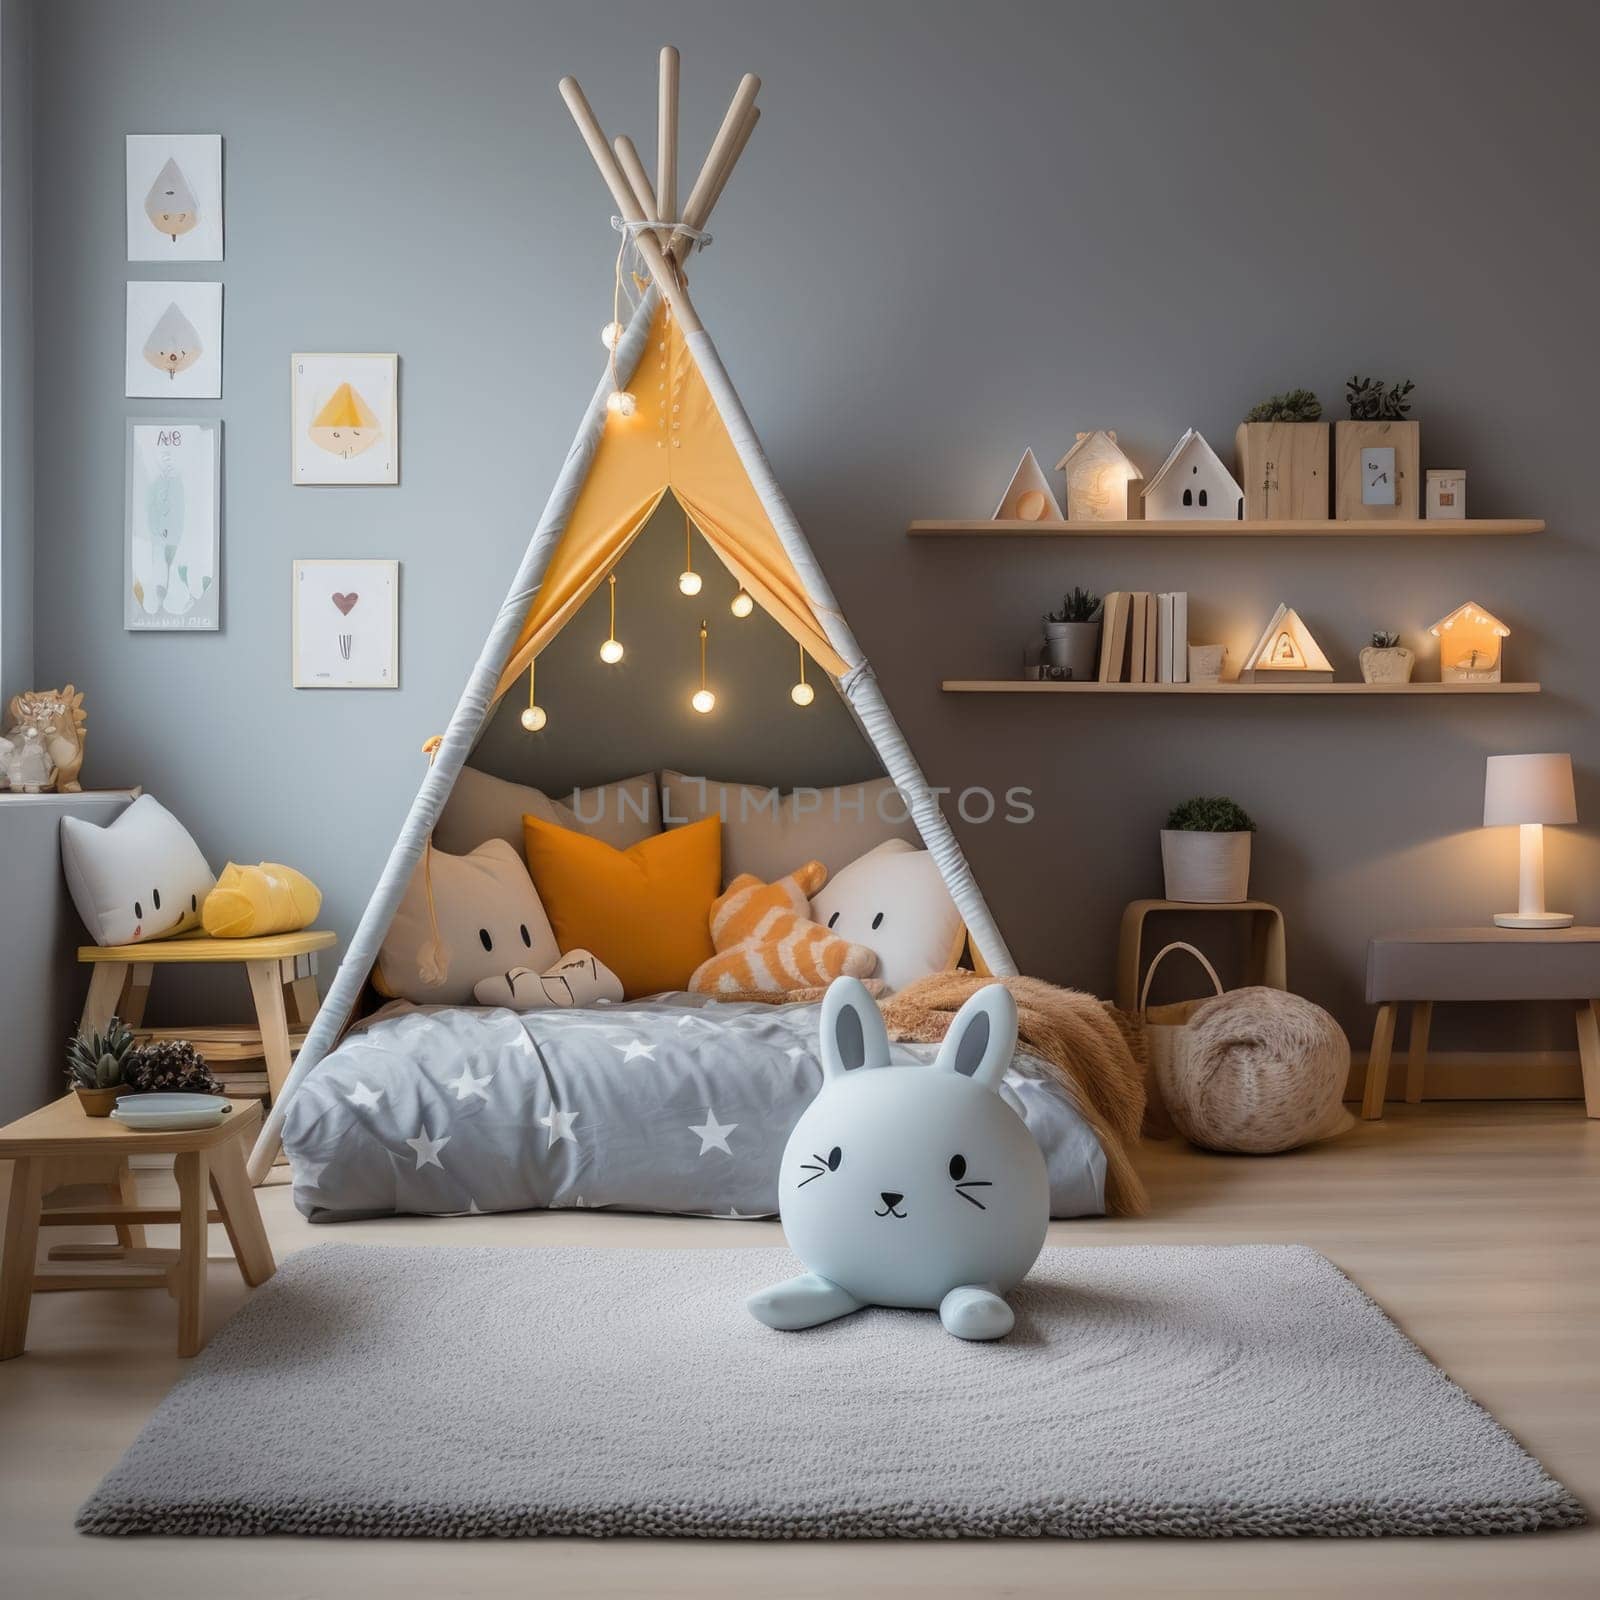 Modern interior of a children's room with a wigwam and soft toys.